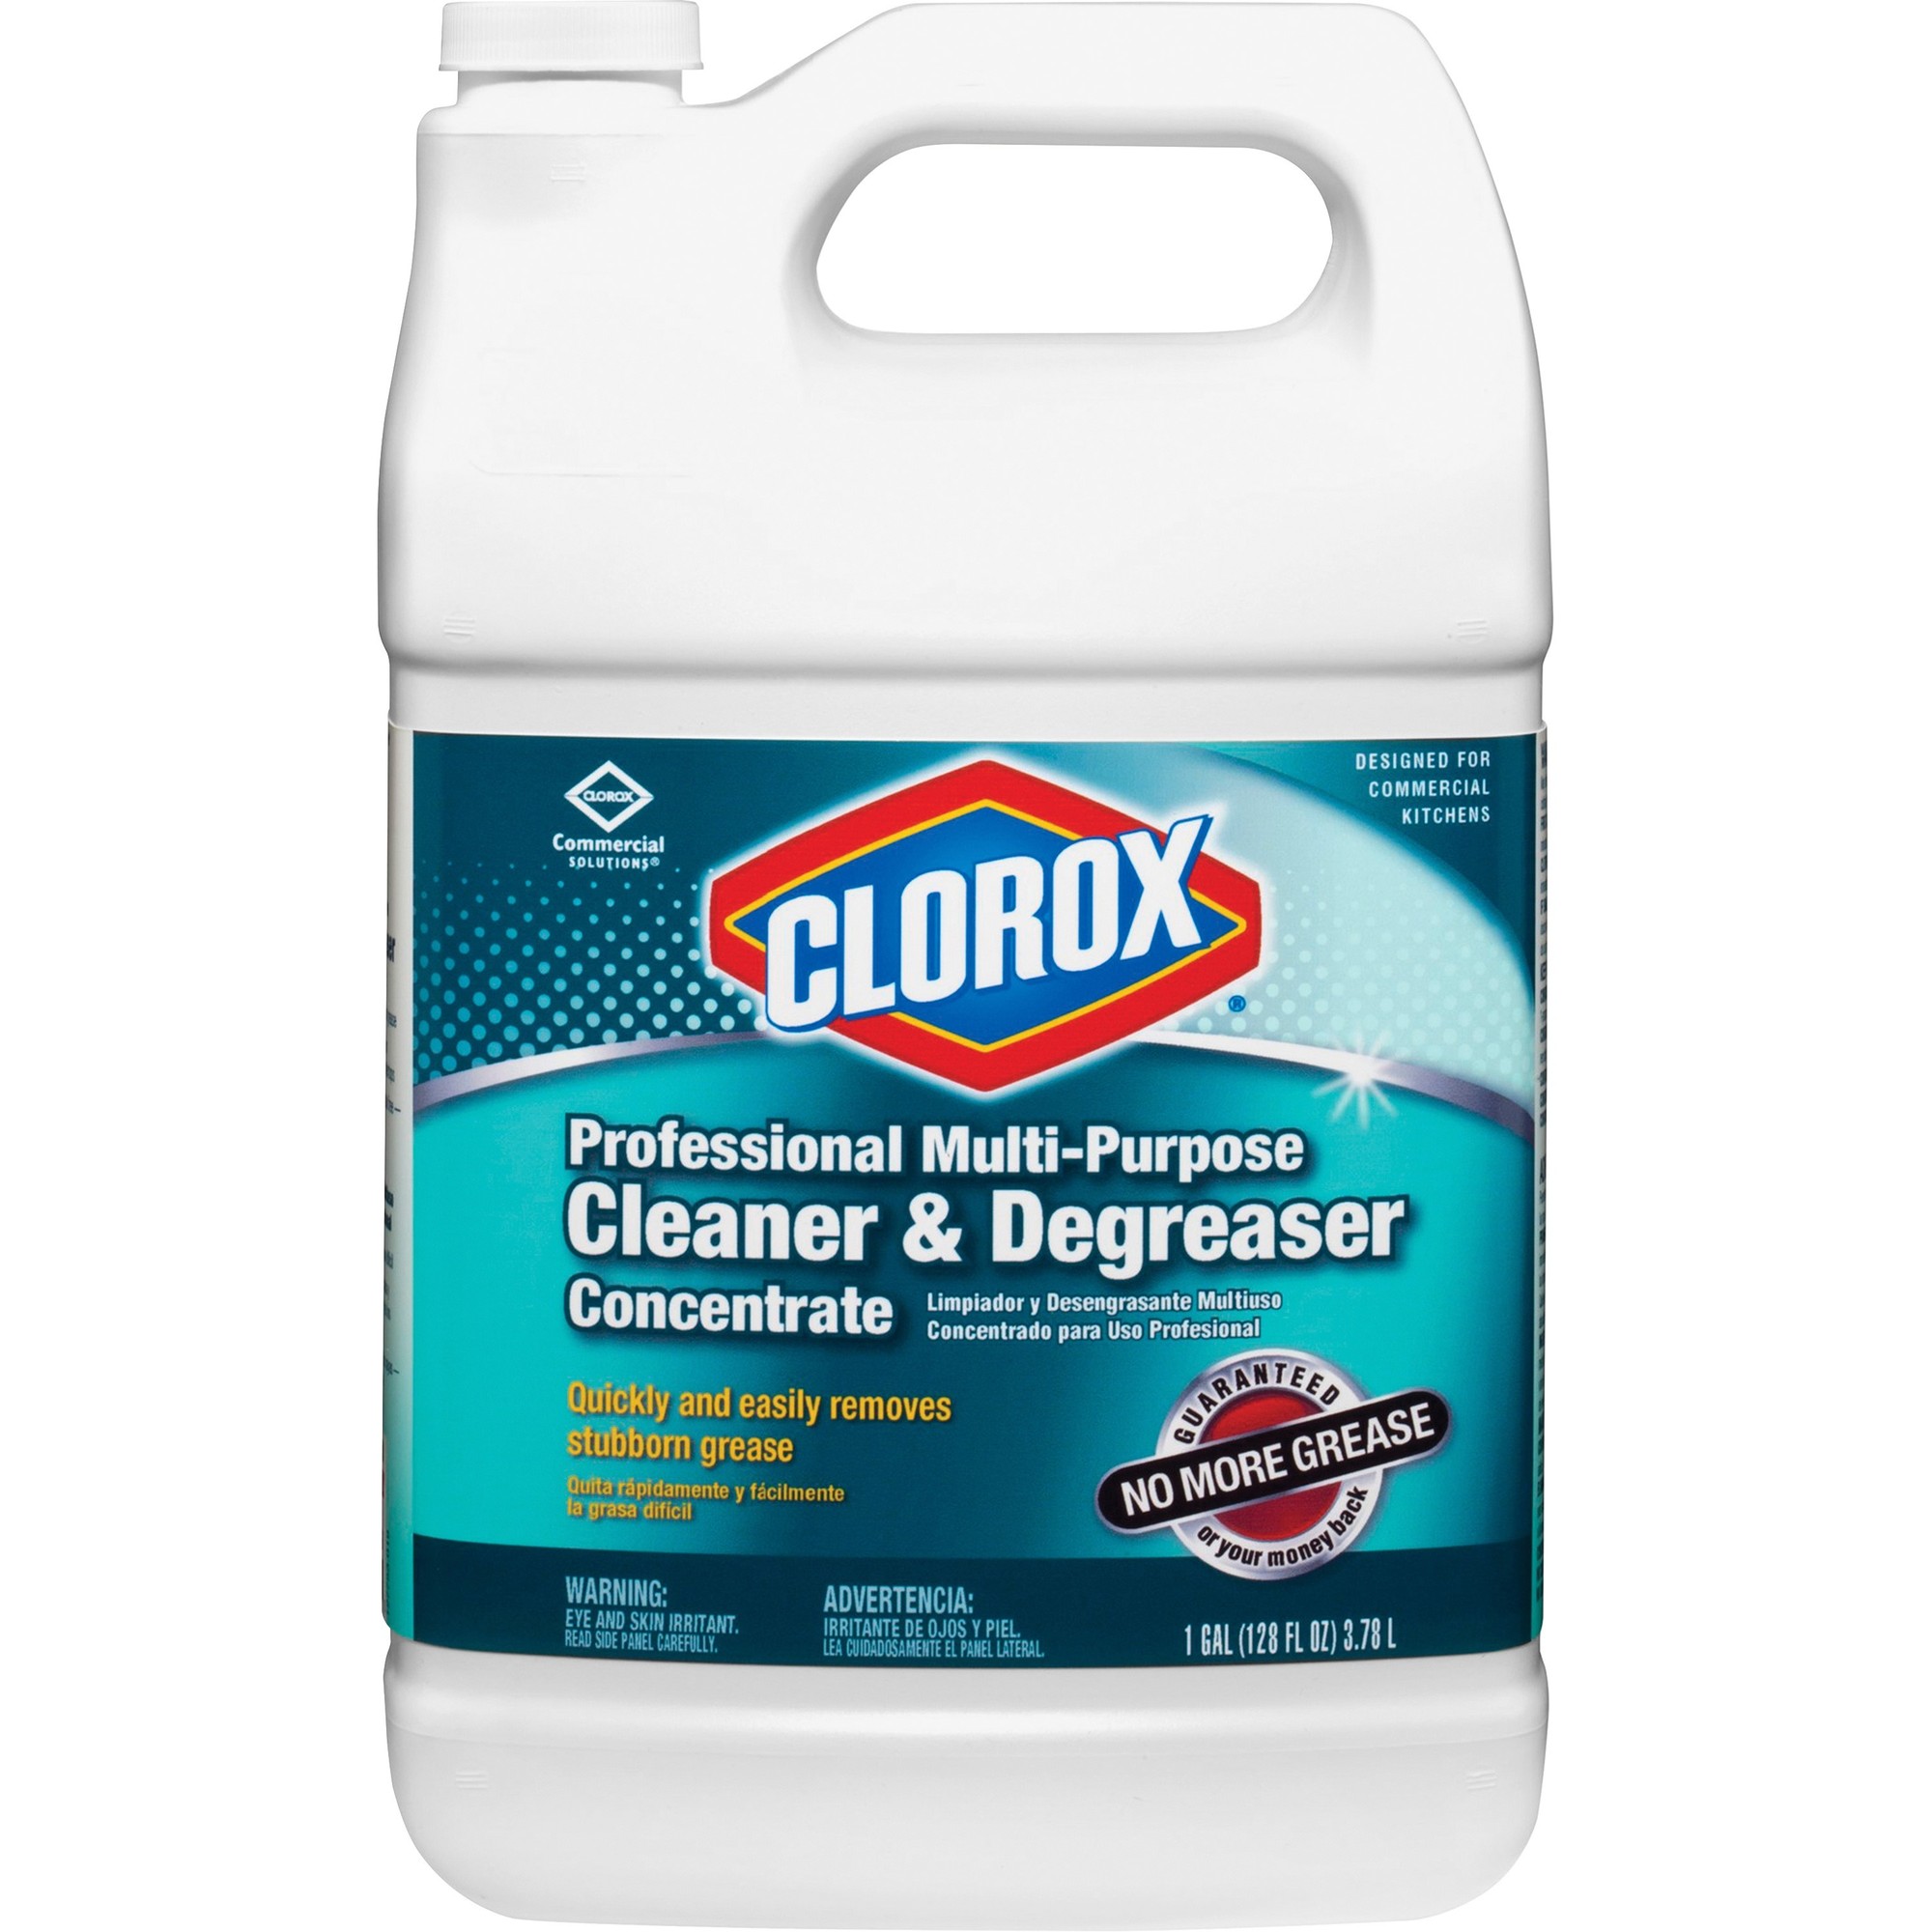 Professional Multi-Purpose Cleaner & Degreaser, Concentrate, Citrus, 1gal Bottle